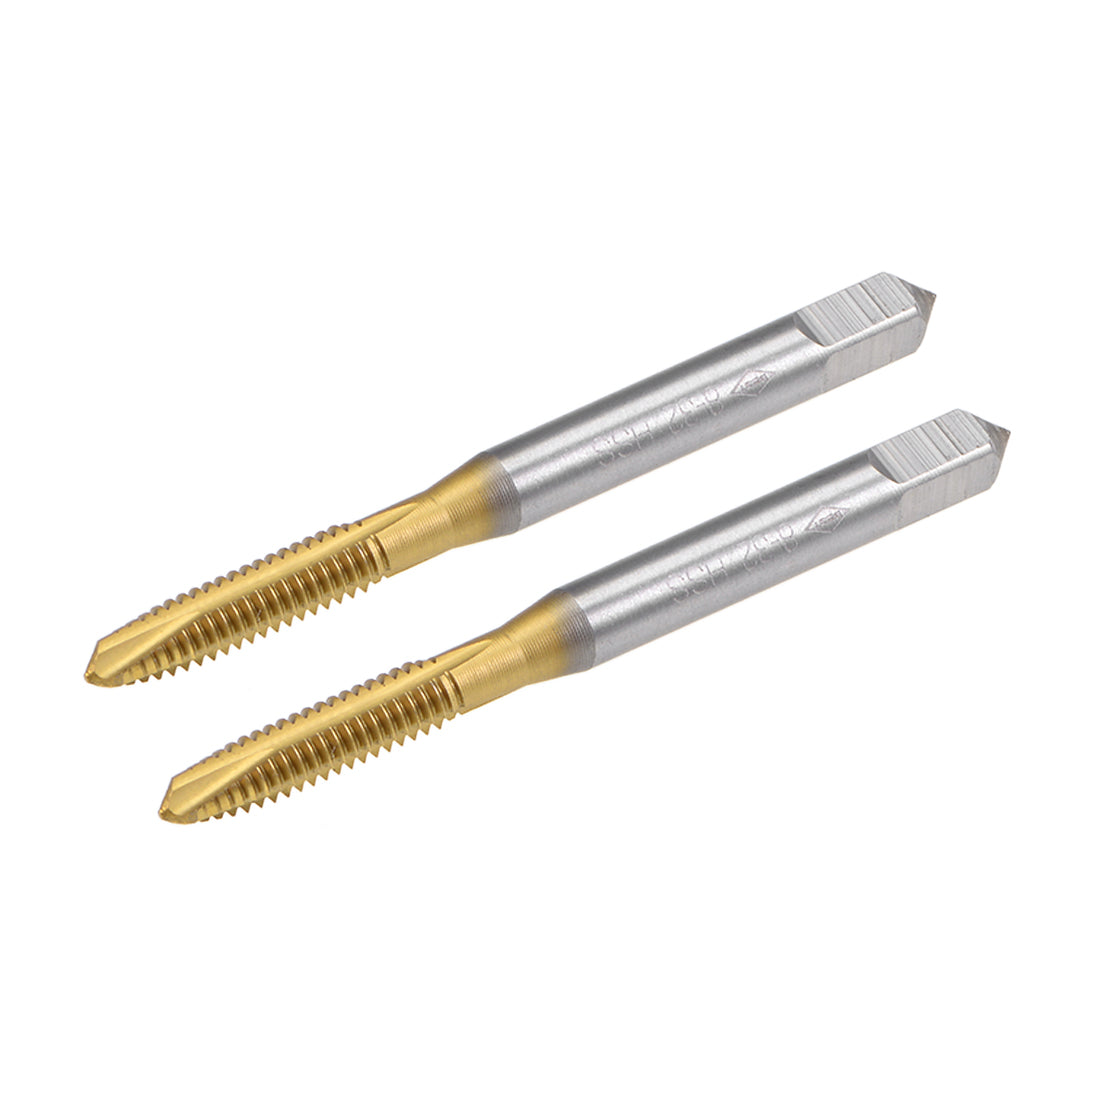 uxcell Uxcell Spiral Point Threading Tap 8-32 UNC Thread Pitch Titanium Coated HSS 2pcs